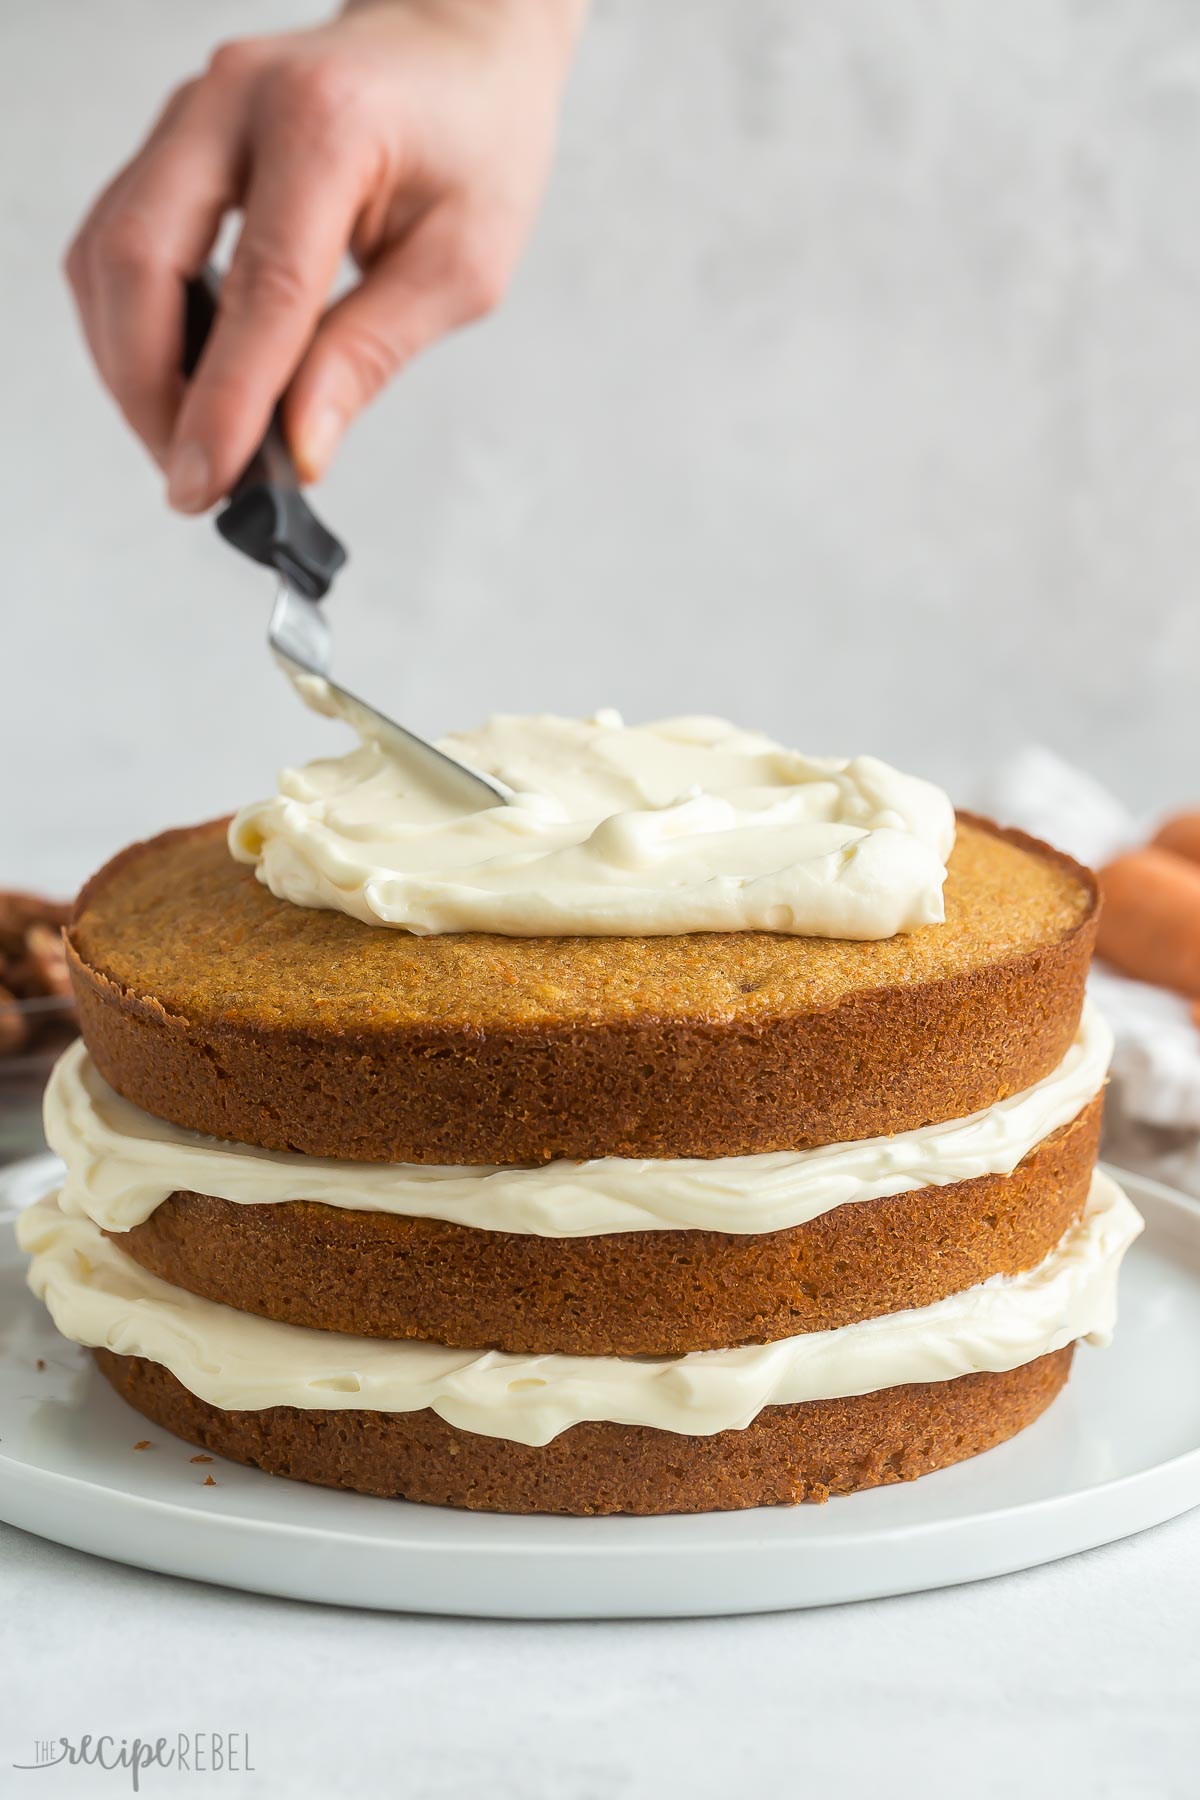 cream cheese frosting being spread on top layer of carrot cake